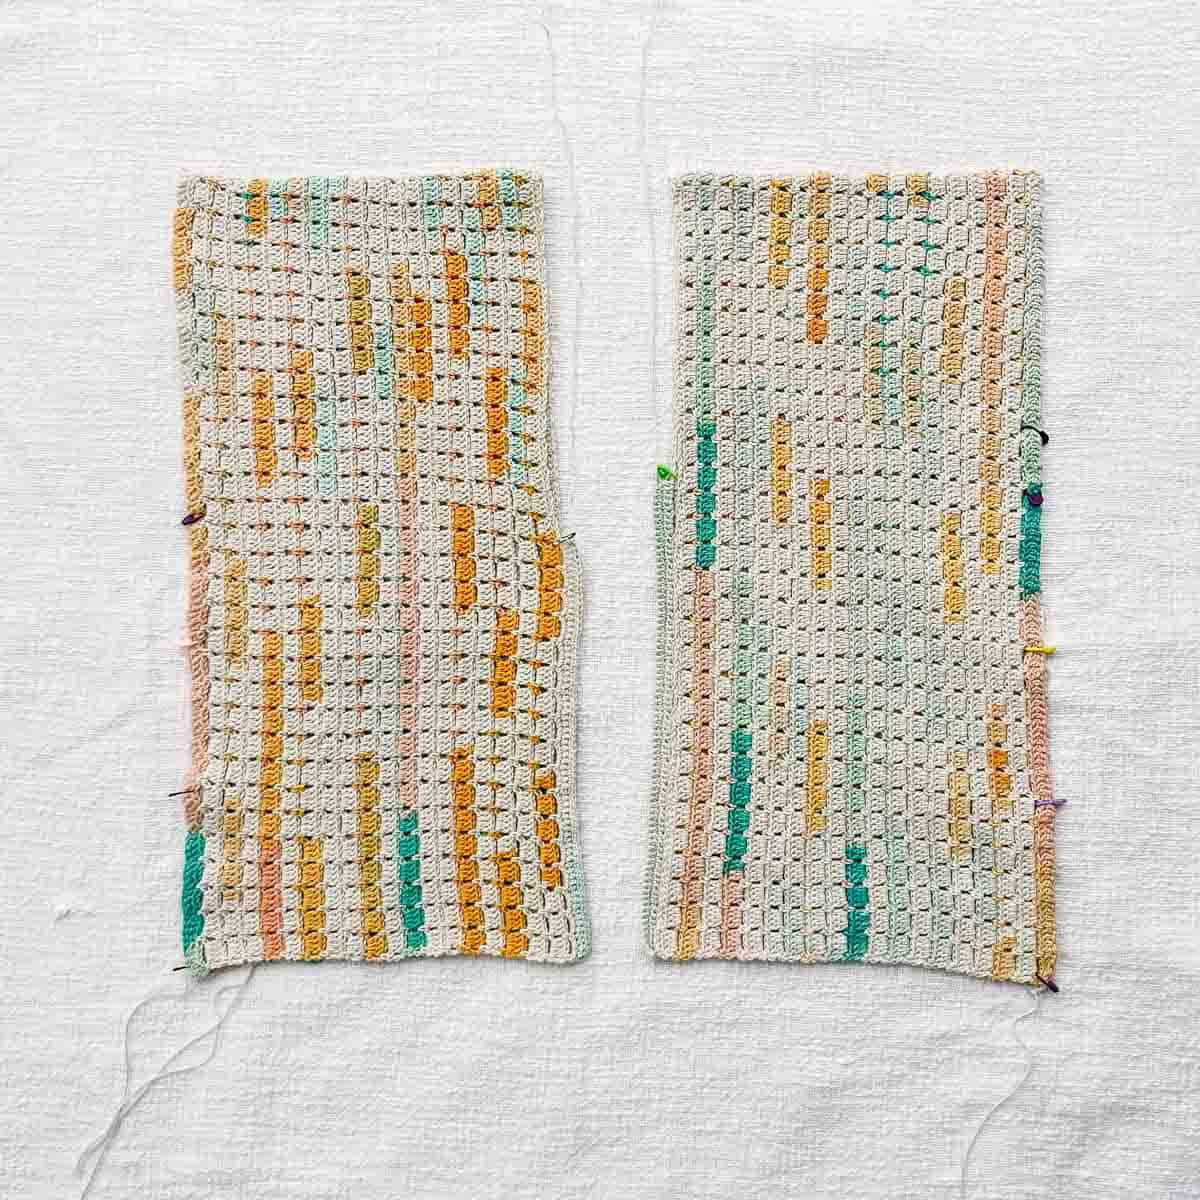 Two long crocheted rectangles laid out next to each other.